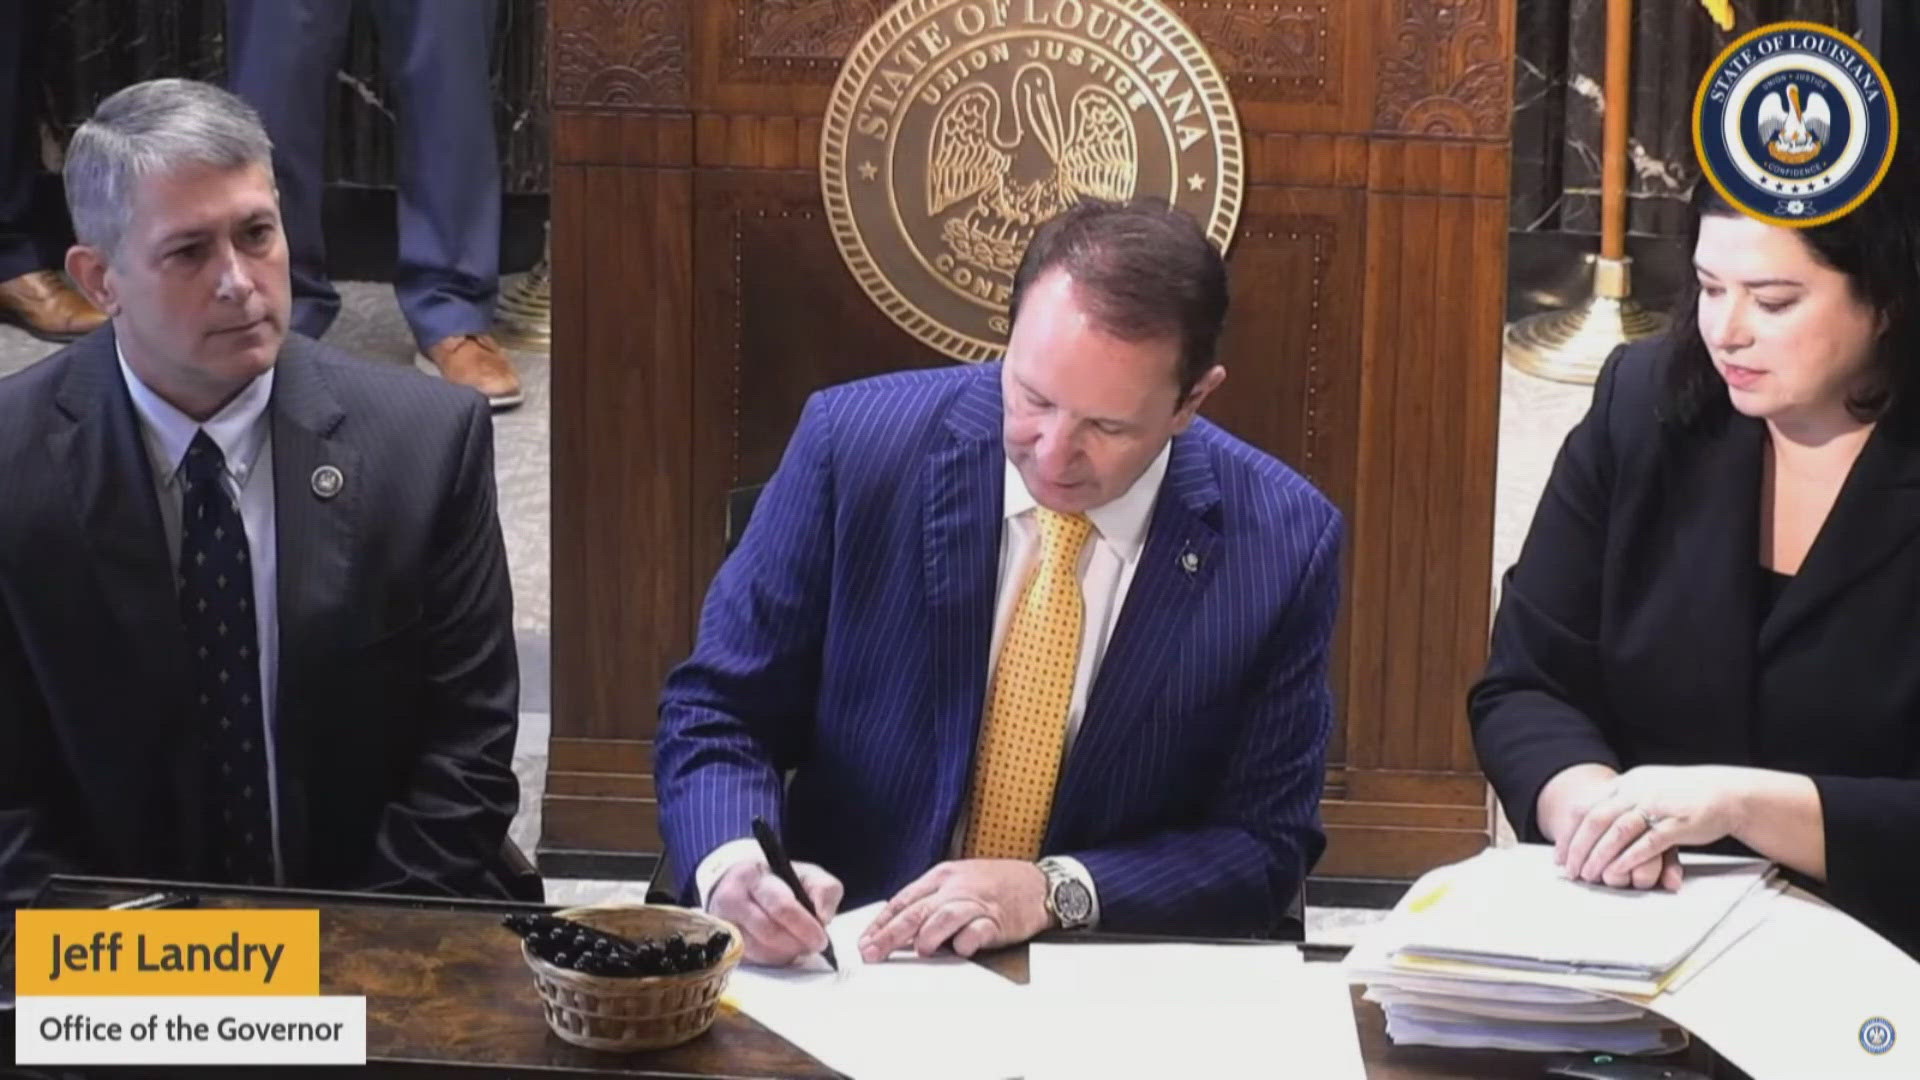 Governor Jeff Landry signed an insurance bill into law that got rid of a rule that banned companies from canceling homeowner policies after three years.